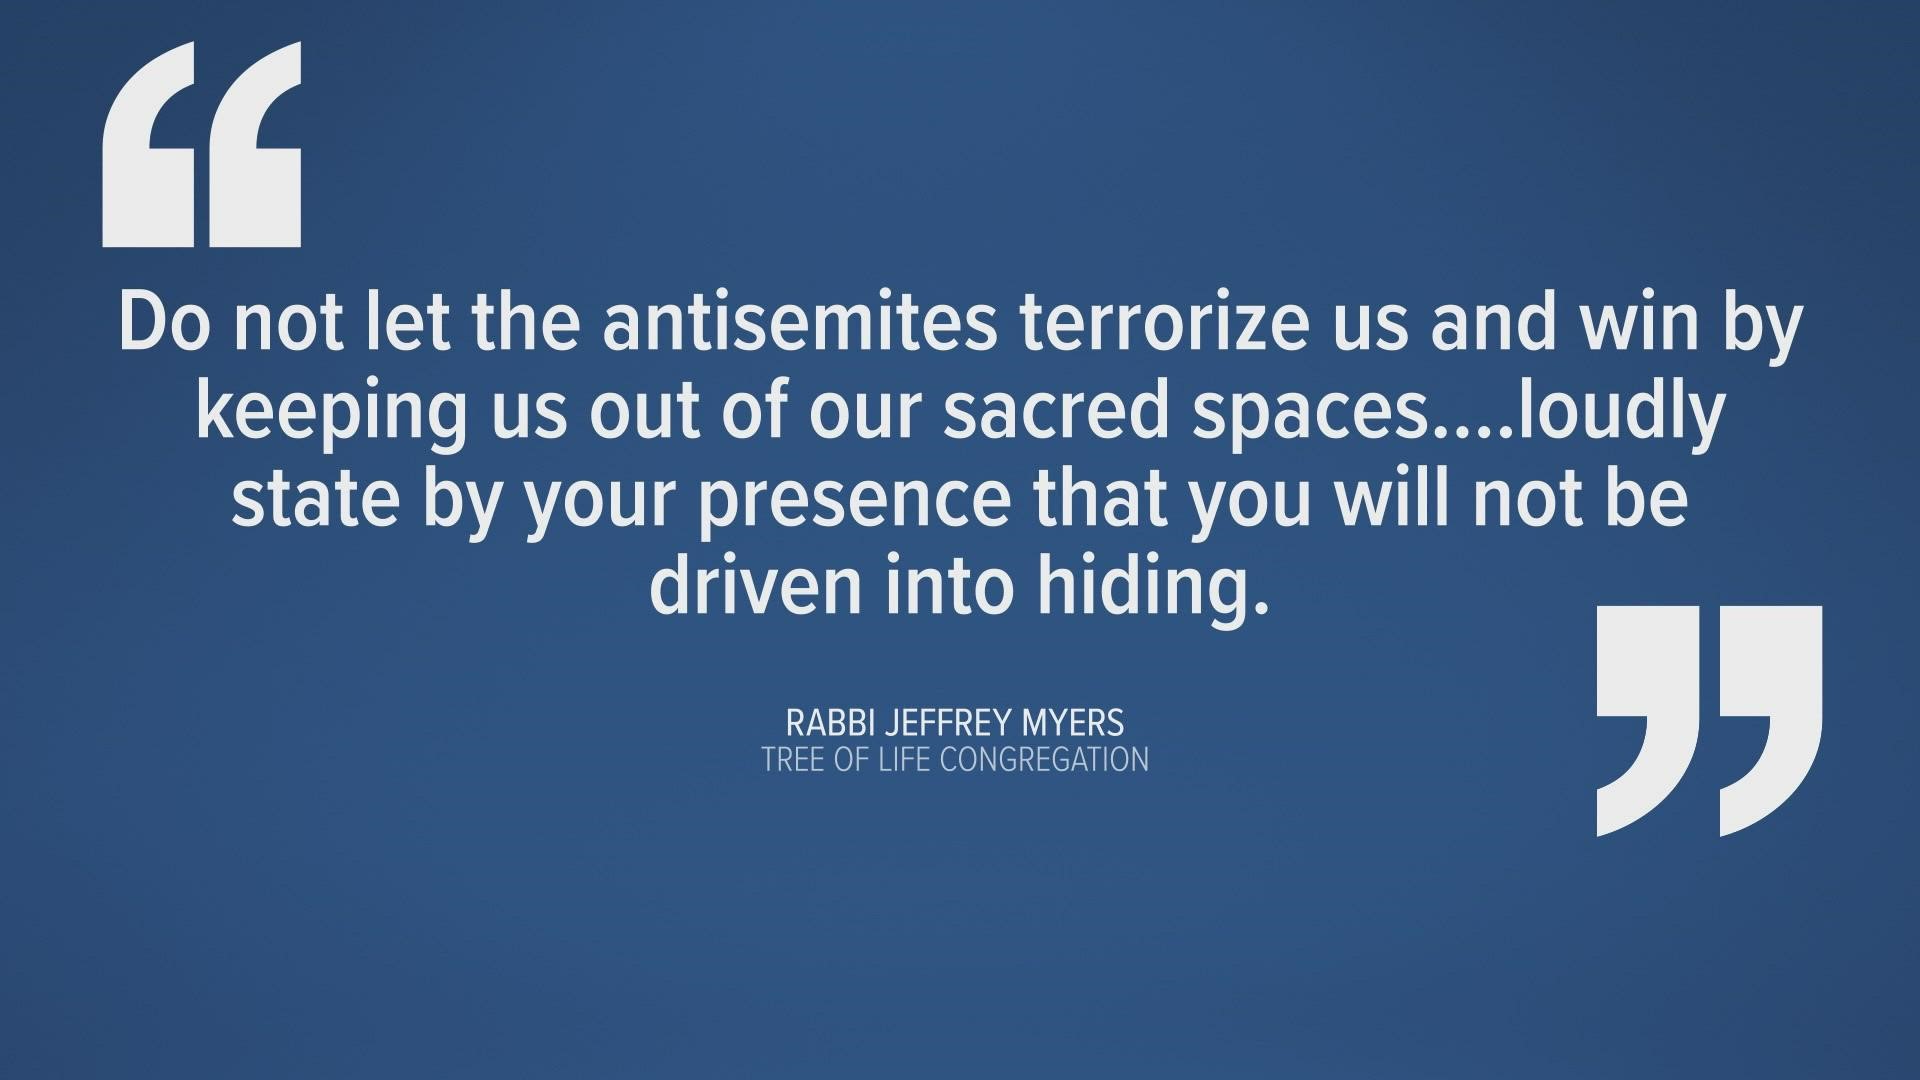 Across the nation, Jewish leaders urged congregations to go out and worship in large numbers after the hostage incident at a Colleyville synagogue.